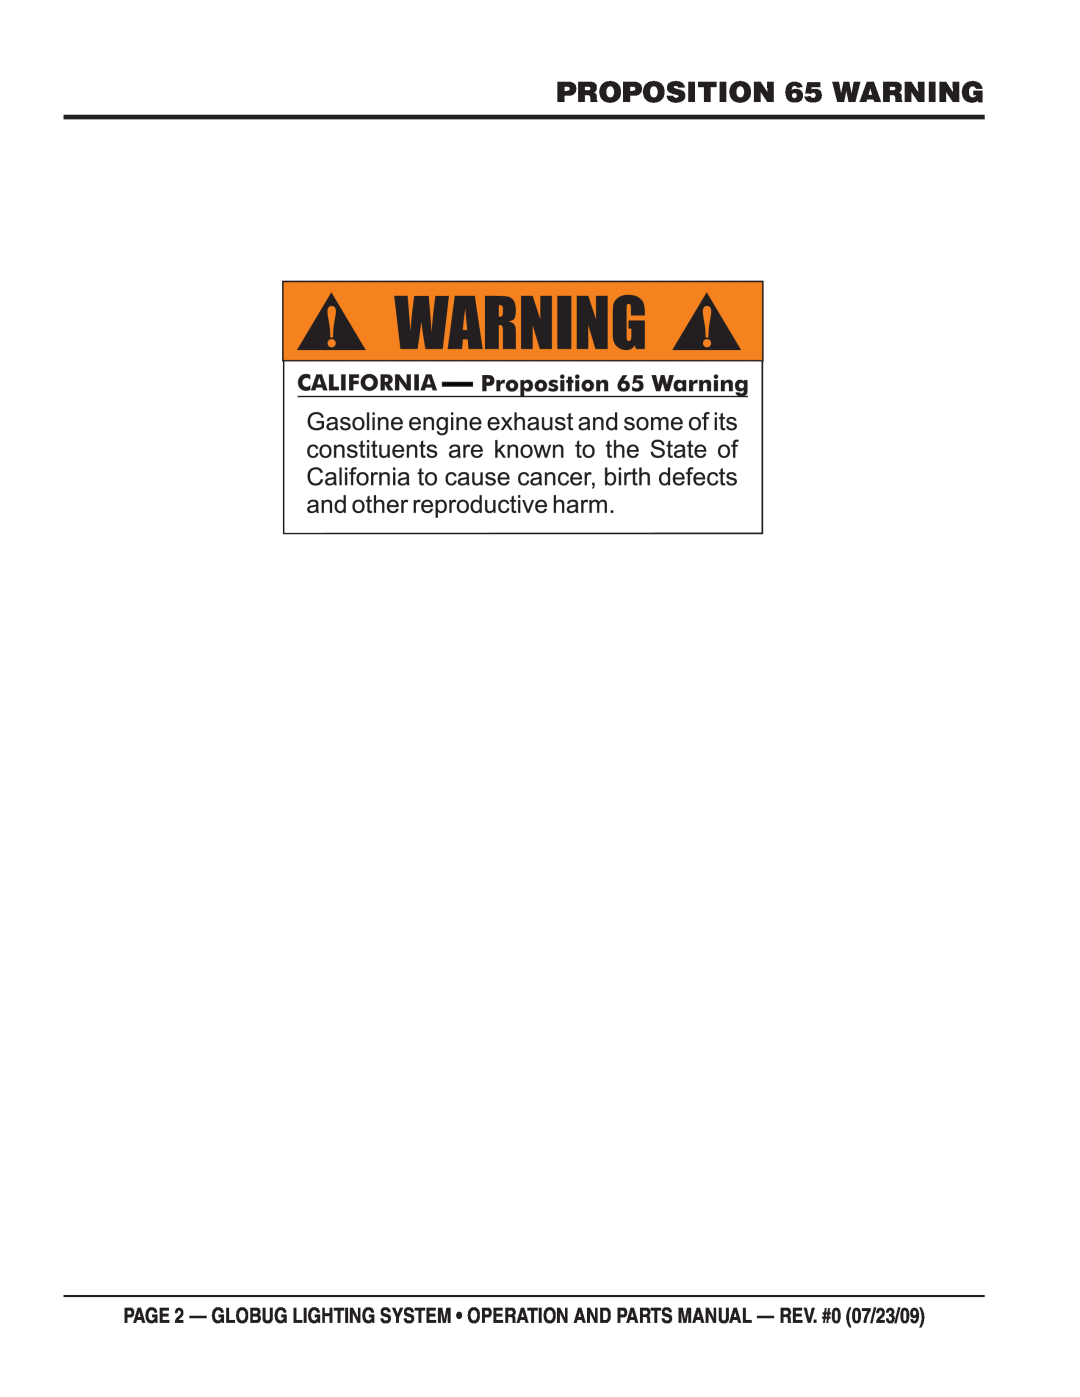 Multiquip GBWE, GBS, BGMP, GBHM, GBP manual PROPOSITION 65 WARNING 